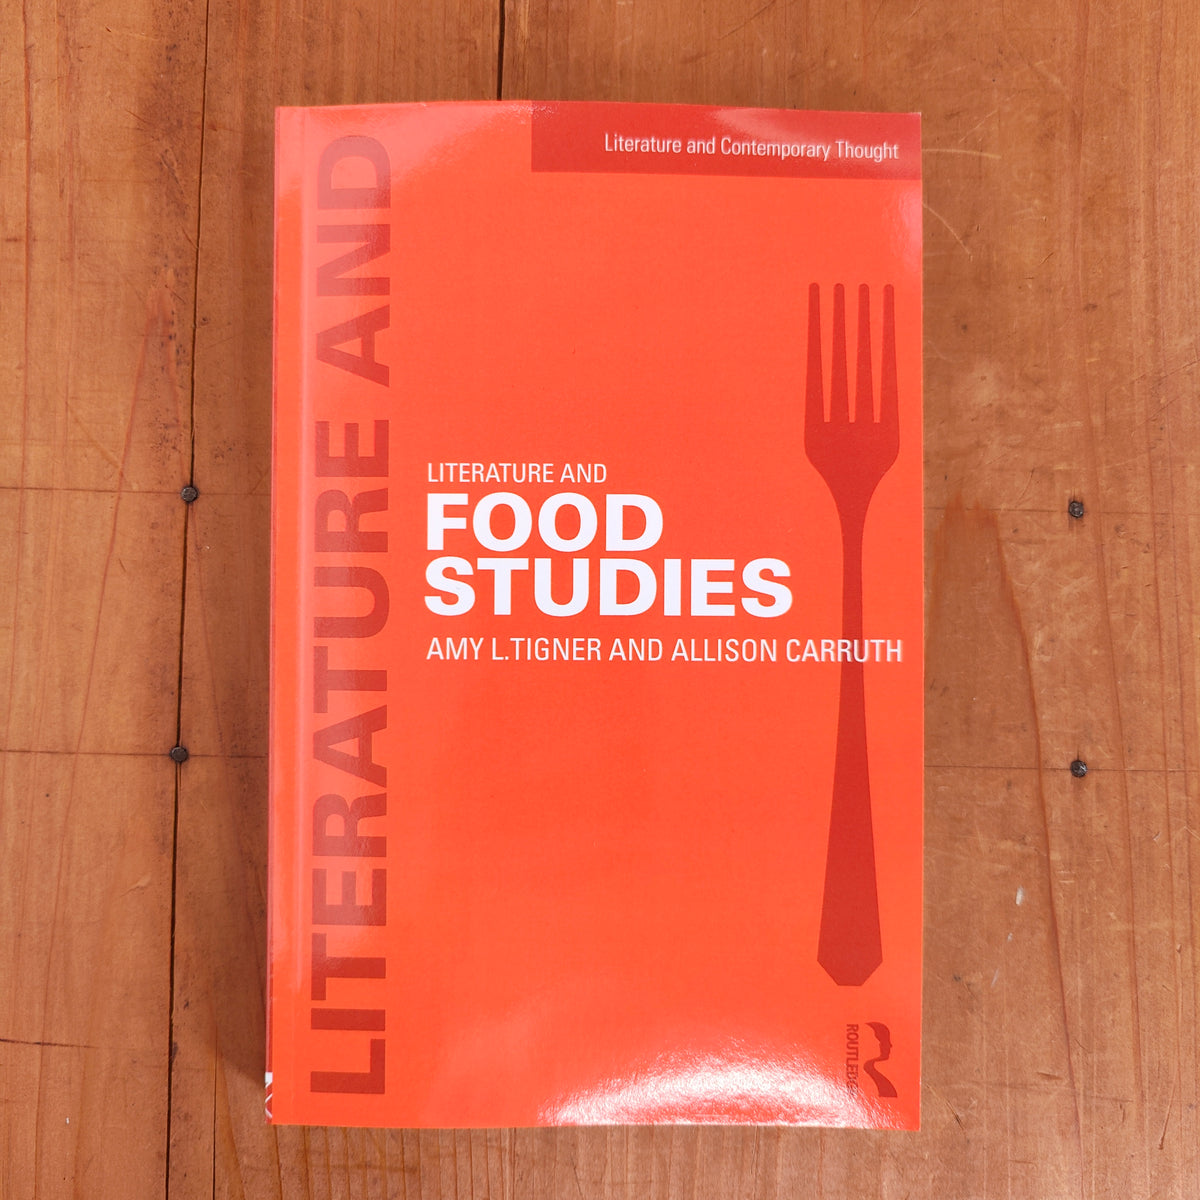 Literature and Food Studies - Amy L. Tigner and Allison Carruth